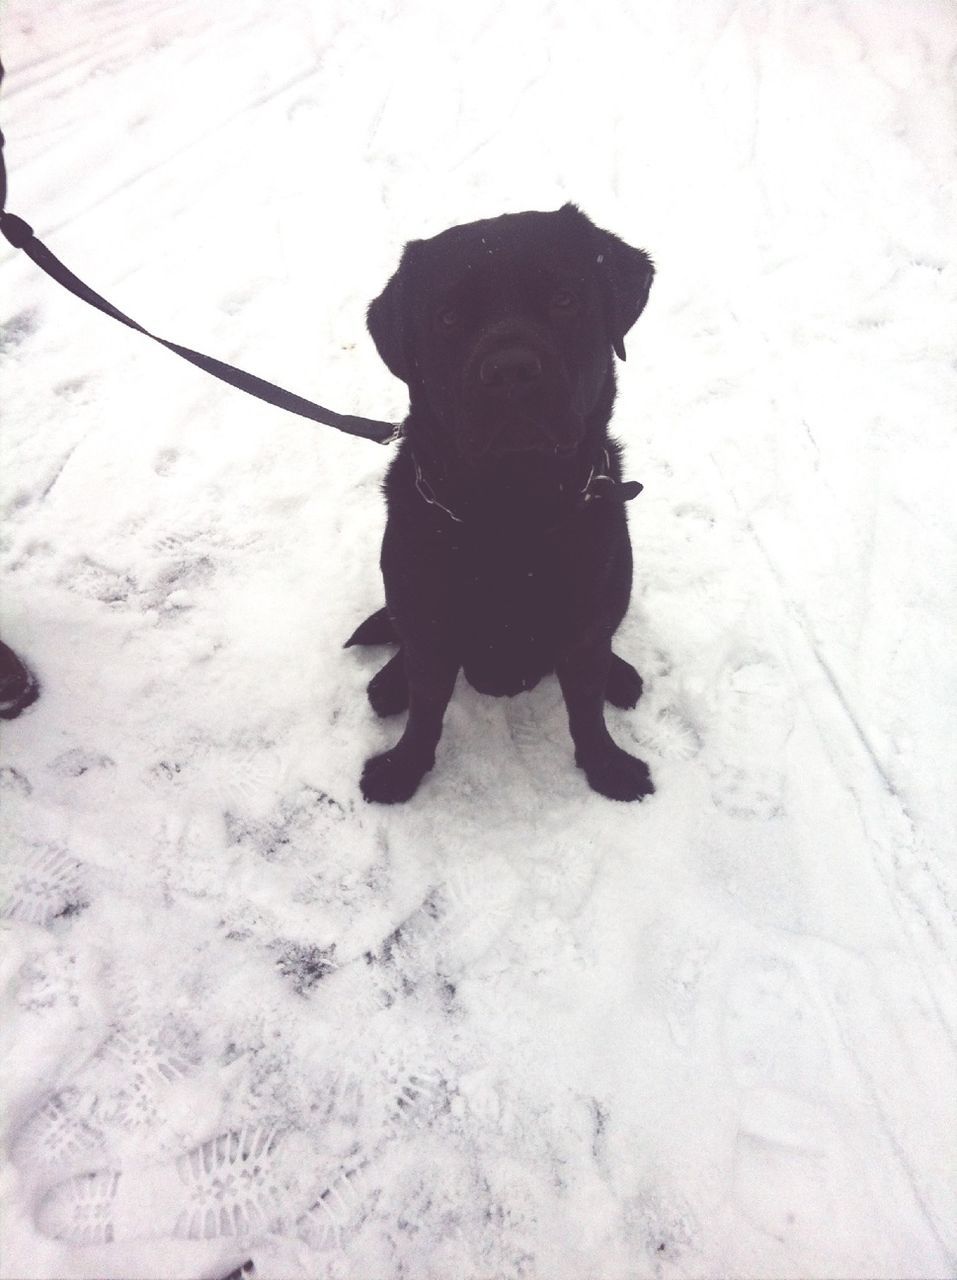 snow, one animal, animal themes, dog, cold temperature, winter, domestic animals, pets, full length, mammal, season, black color, high angle view, portrait, looking at camera, weather, white color, outdoors, covering, no people